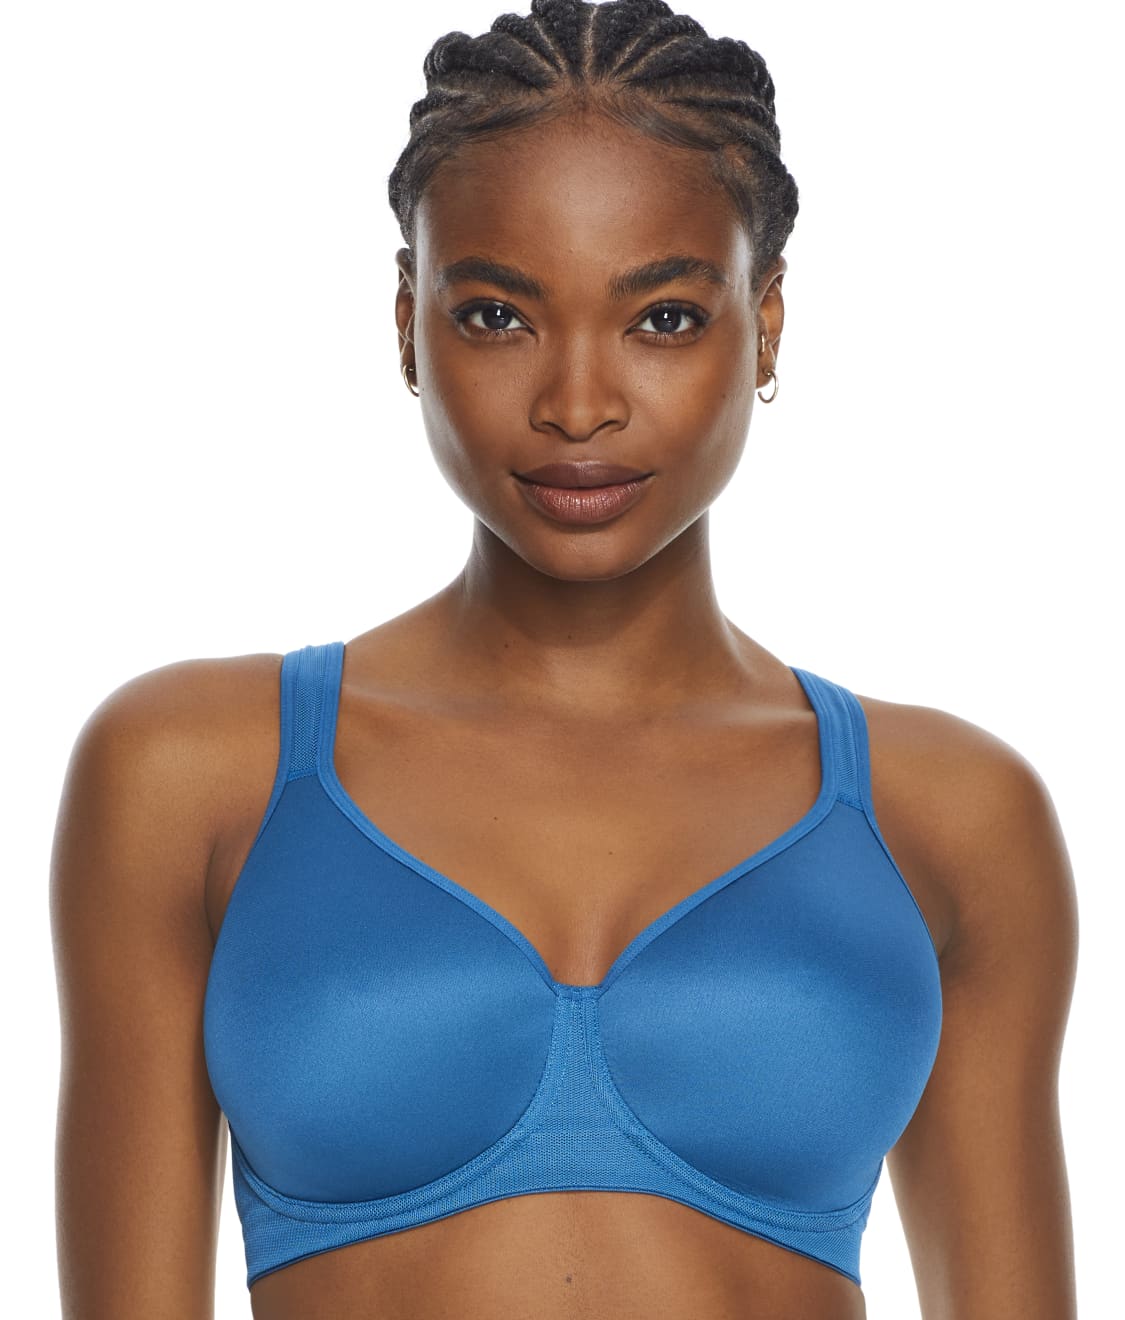 All Day Active High Impact Underwire Sports Bra